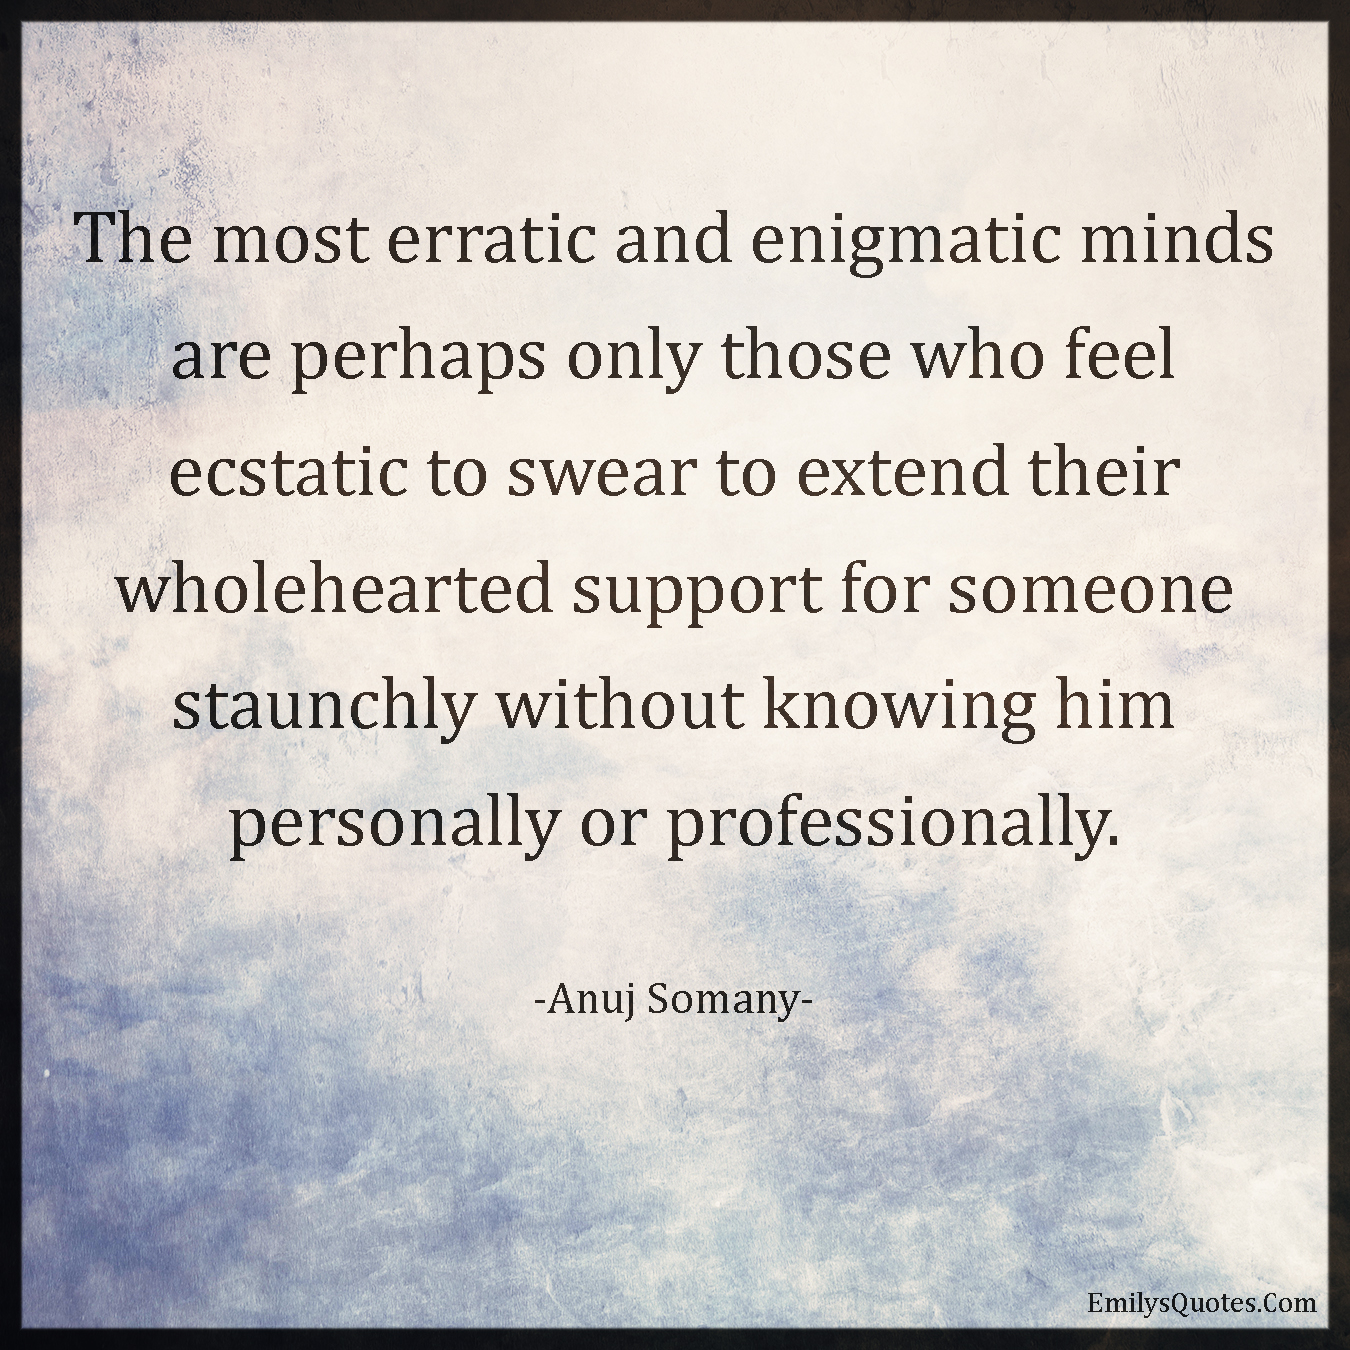 The most erratic and enigmatic minds are perhaps only those who feel